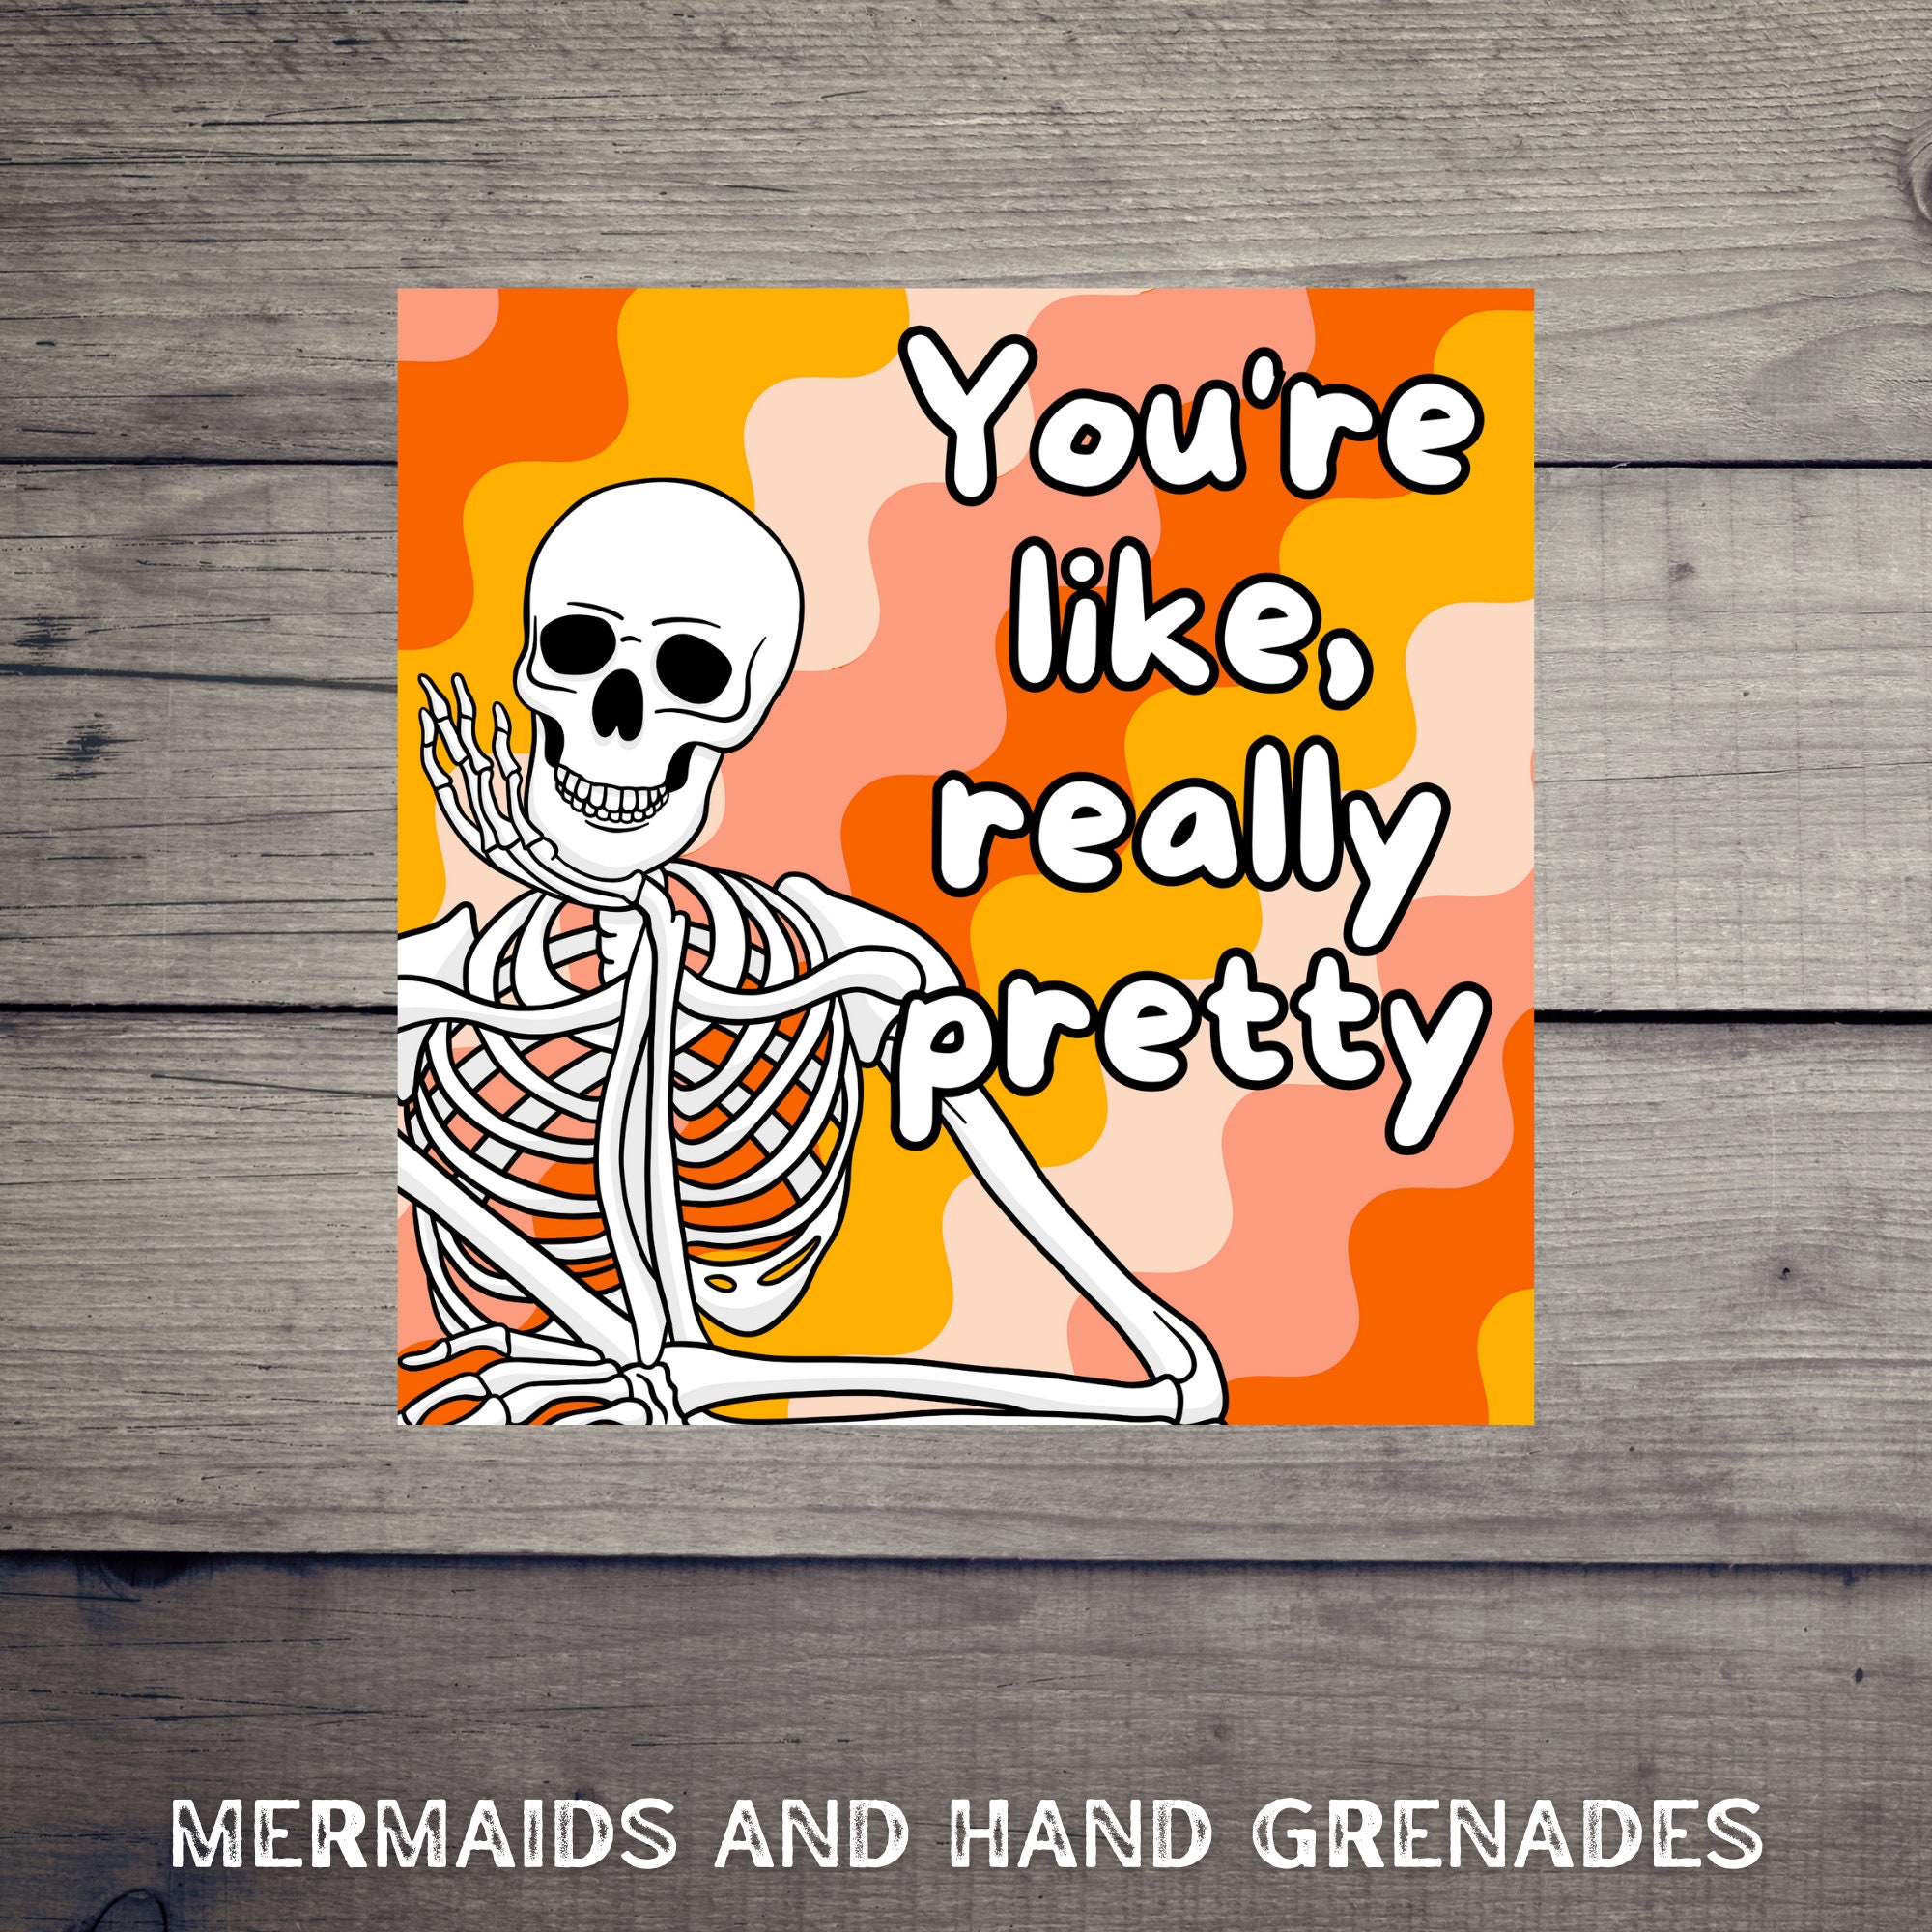 Friendly Skeleton Reminds You to Drink Water Sticker for Sale by